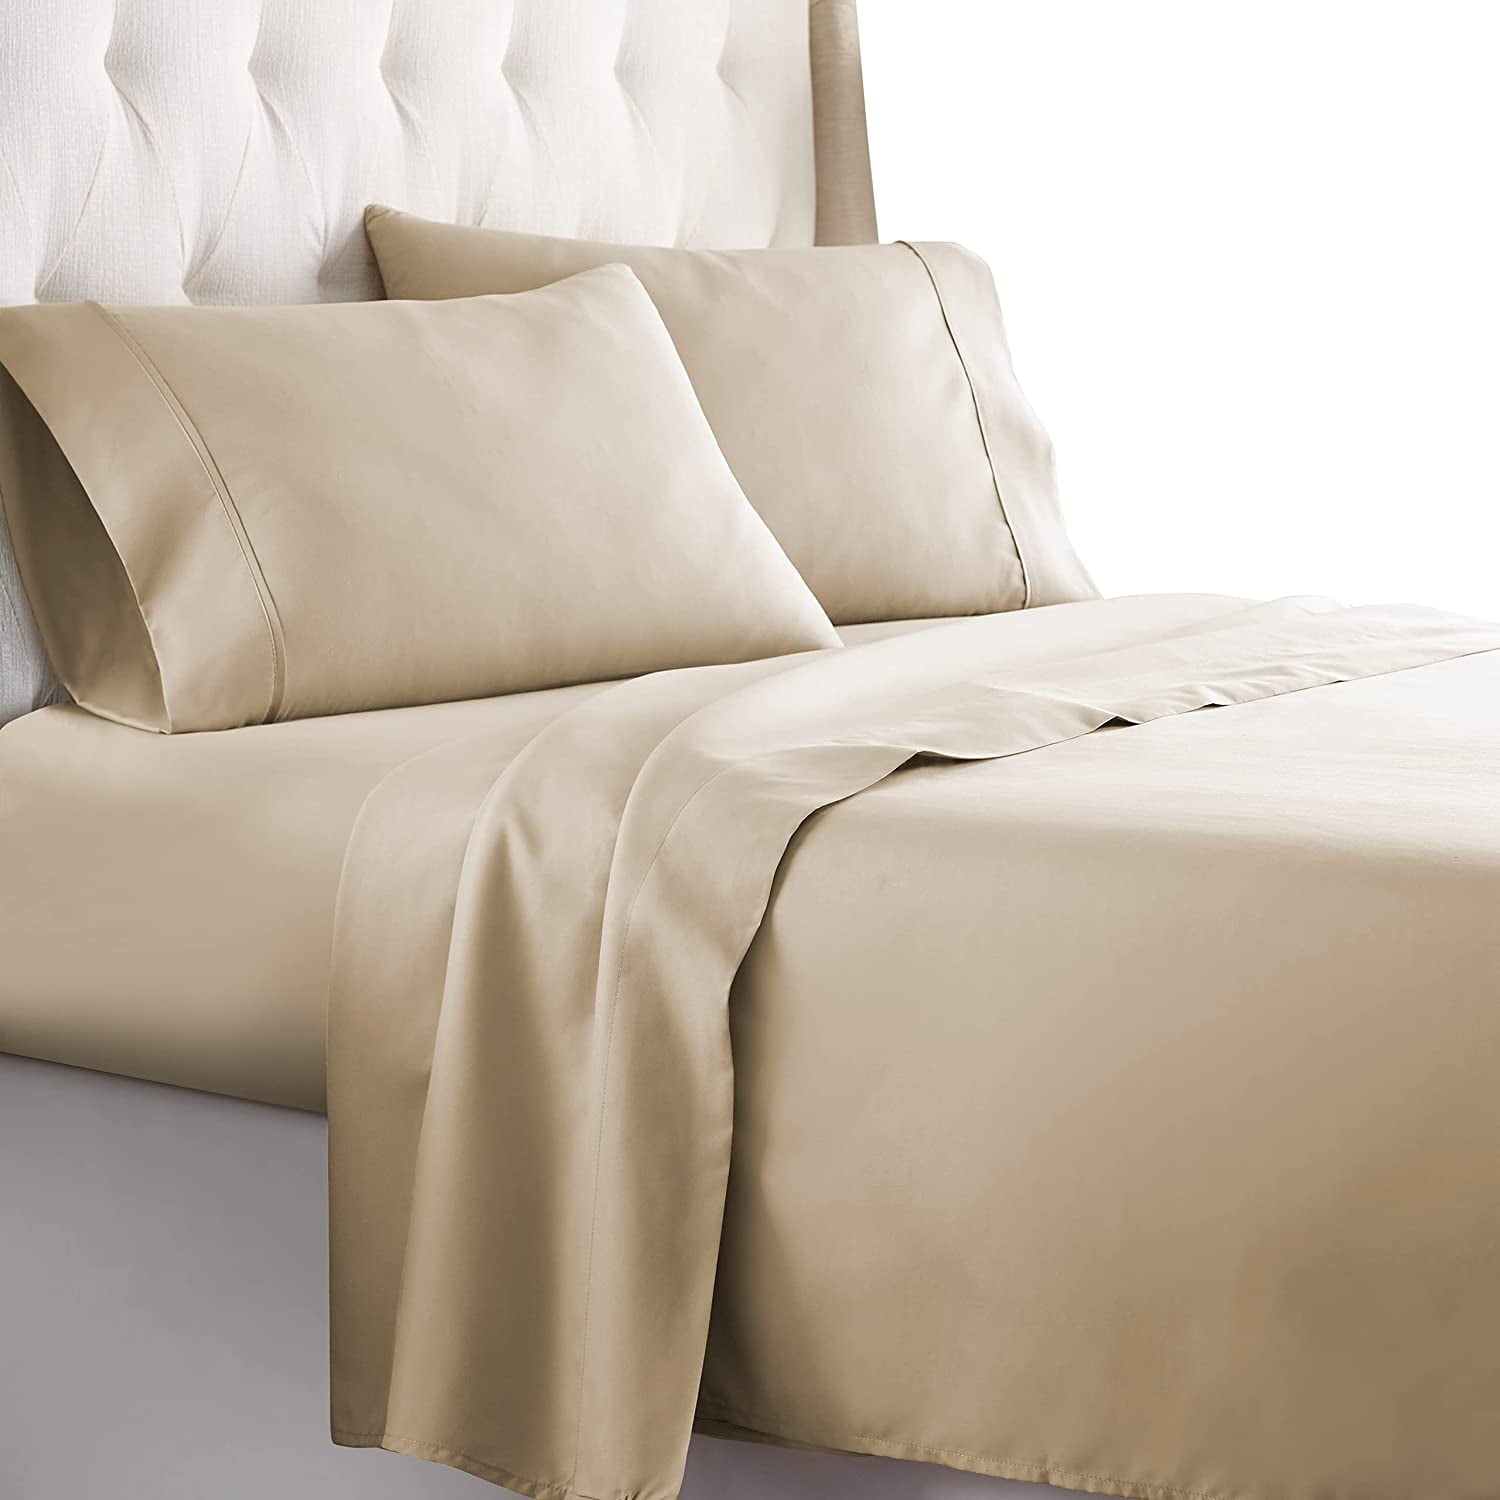 Bed Sheets Set Hotel Luxury 1800 Series Egyptian Quality Platinum for sale online 